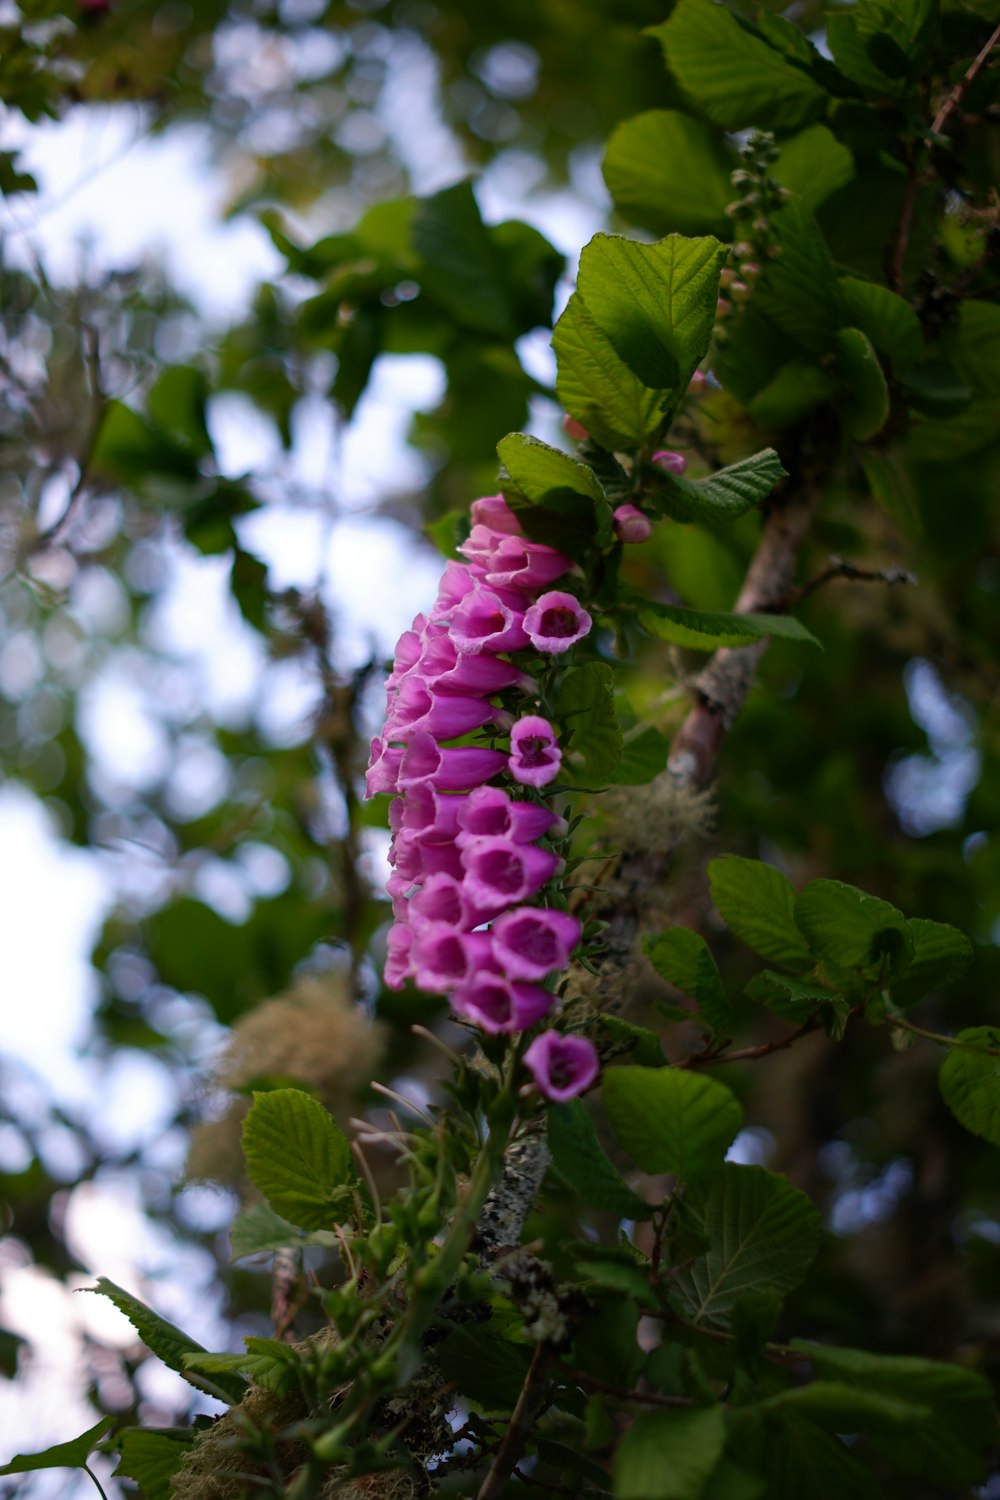 a pink flower growing on a tree branch